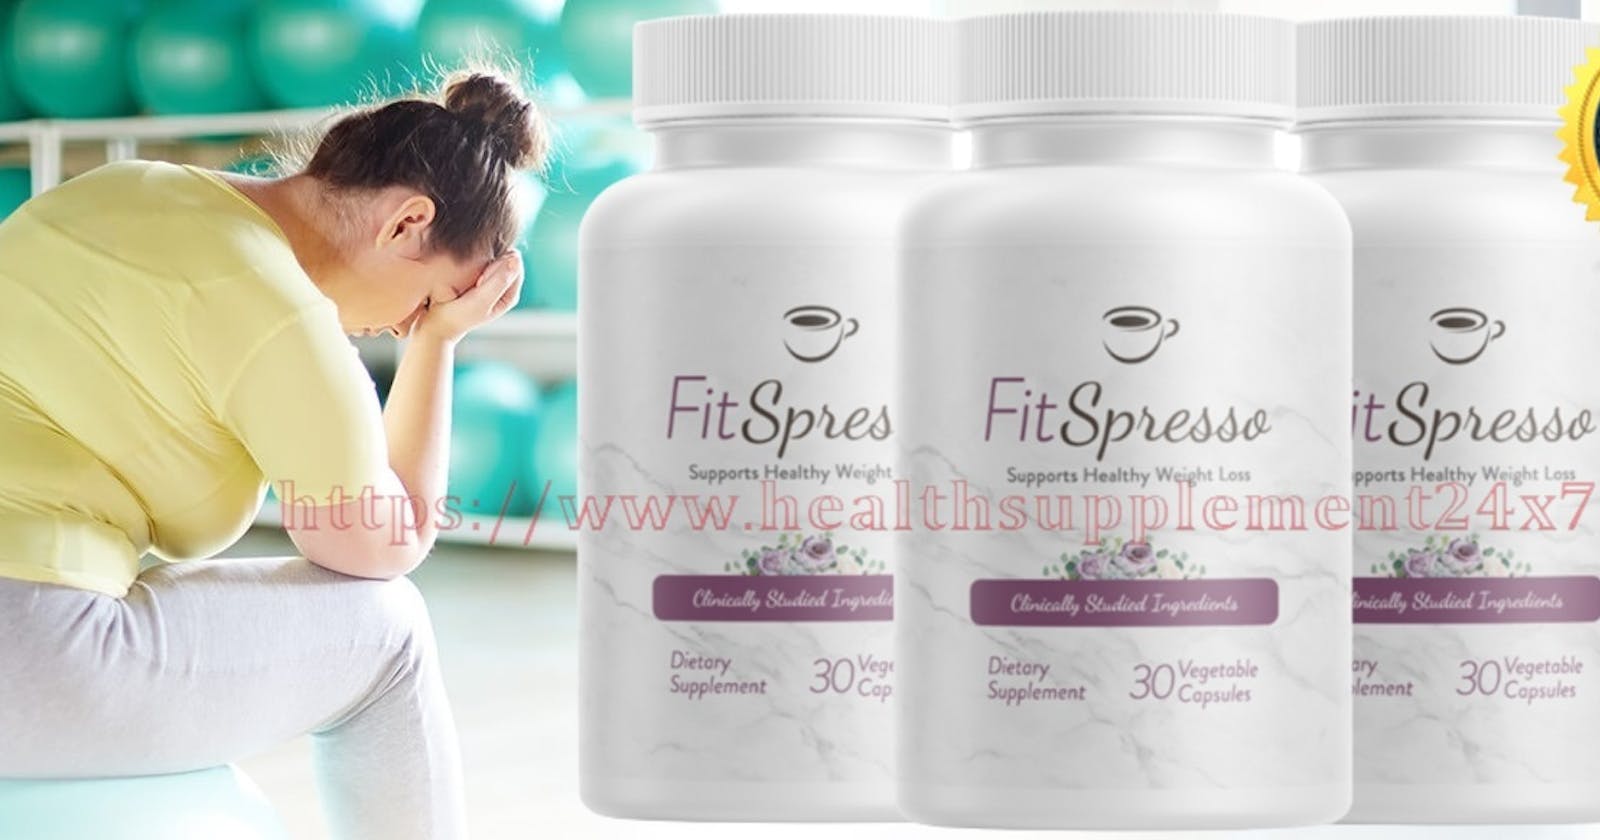 FitSpresso [#1 Premium Weight Loss] Supports Healthy Metabolism, Liver, Brain (Spam Or Legit)